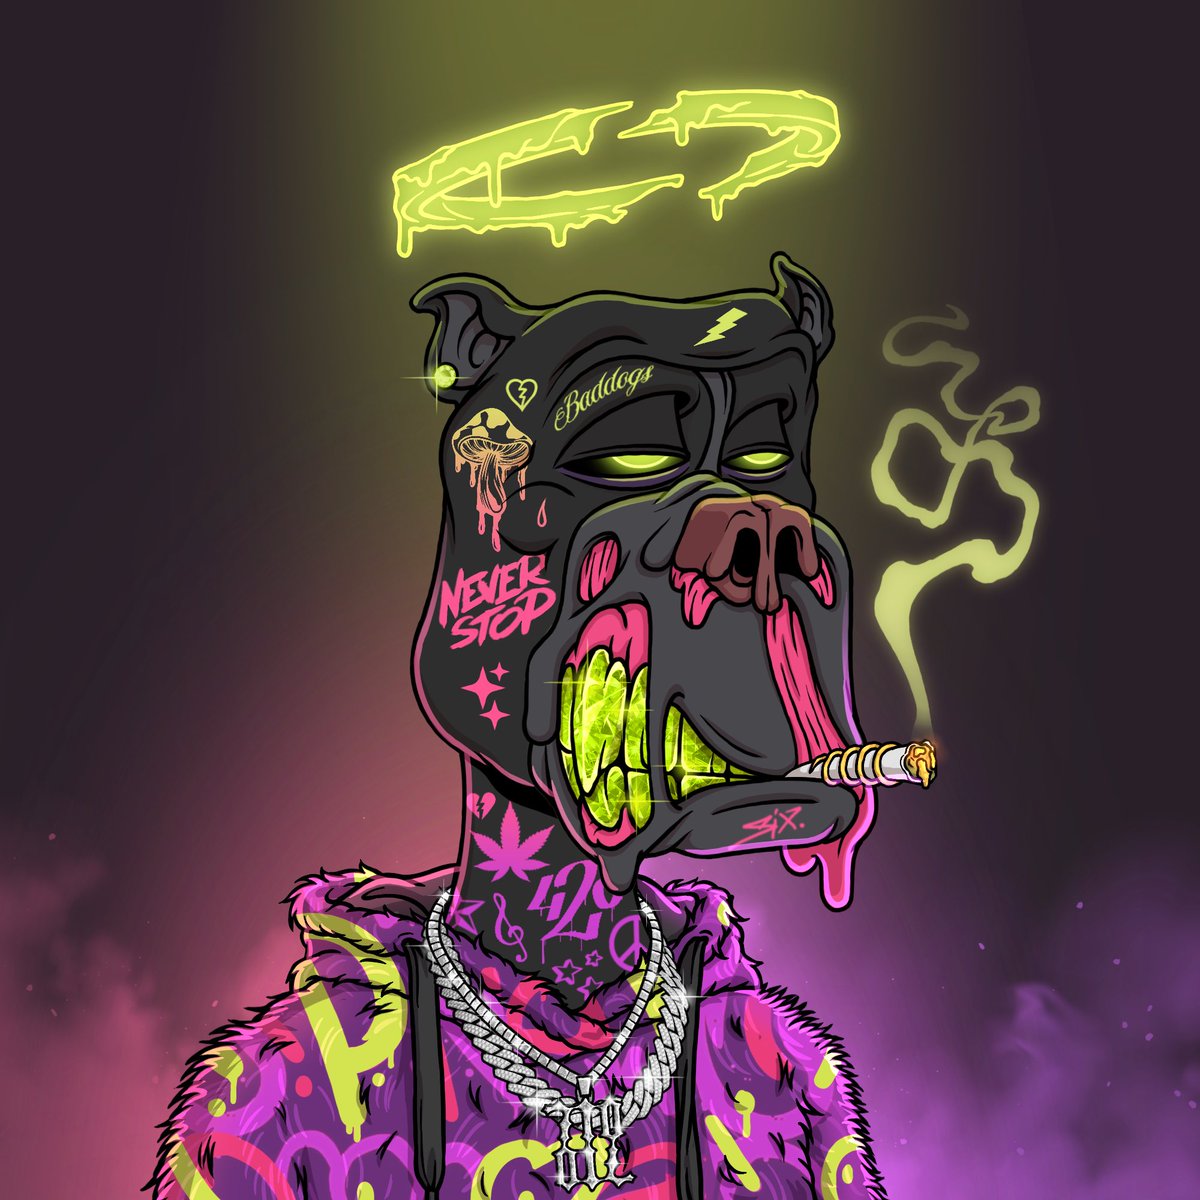 #NewProfilePic Happy #shatterday 🍯😤😤😤🐾🐾🐾 
Had a lil upgrade to Muh face 😏😮‍💨🔥🔥🔥